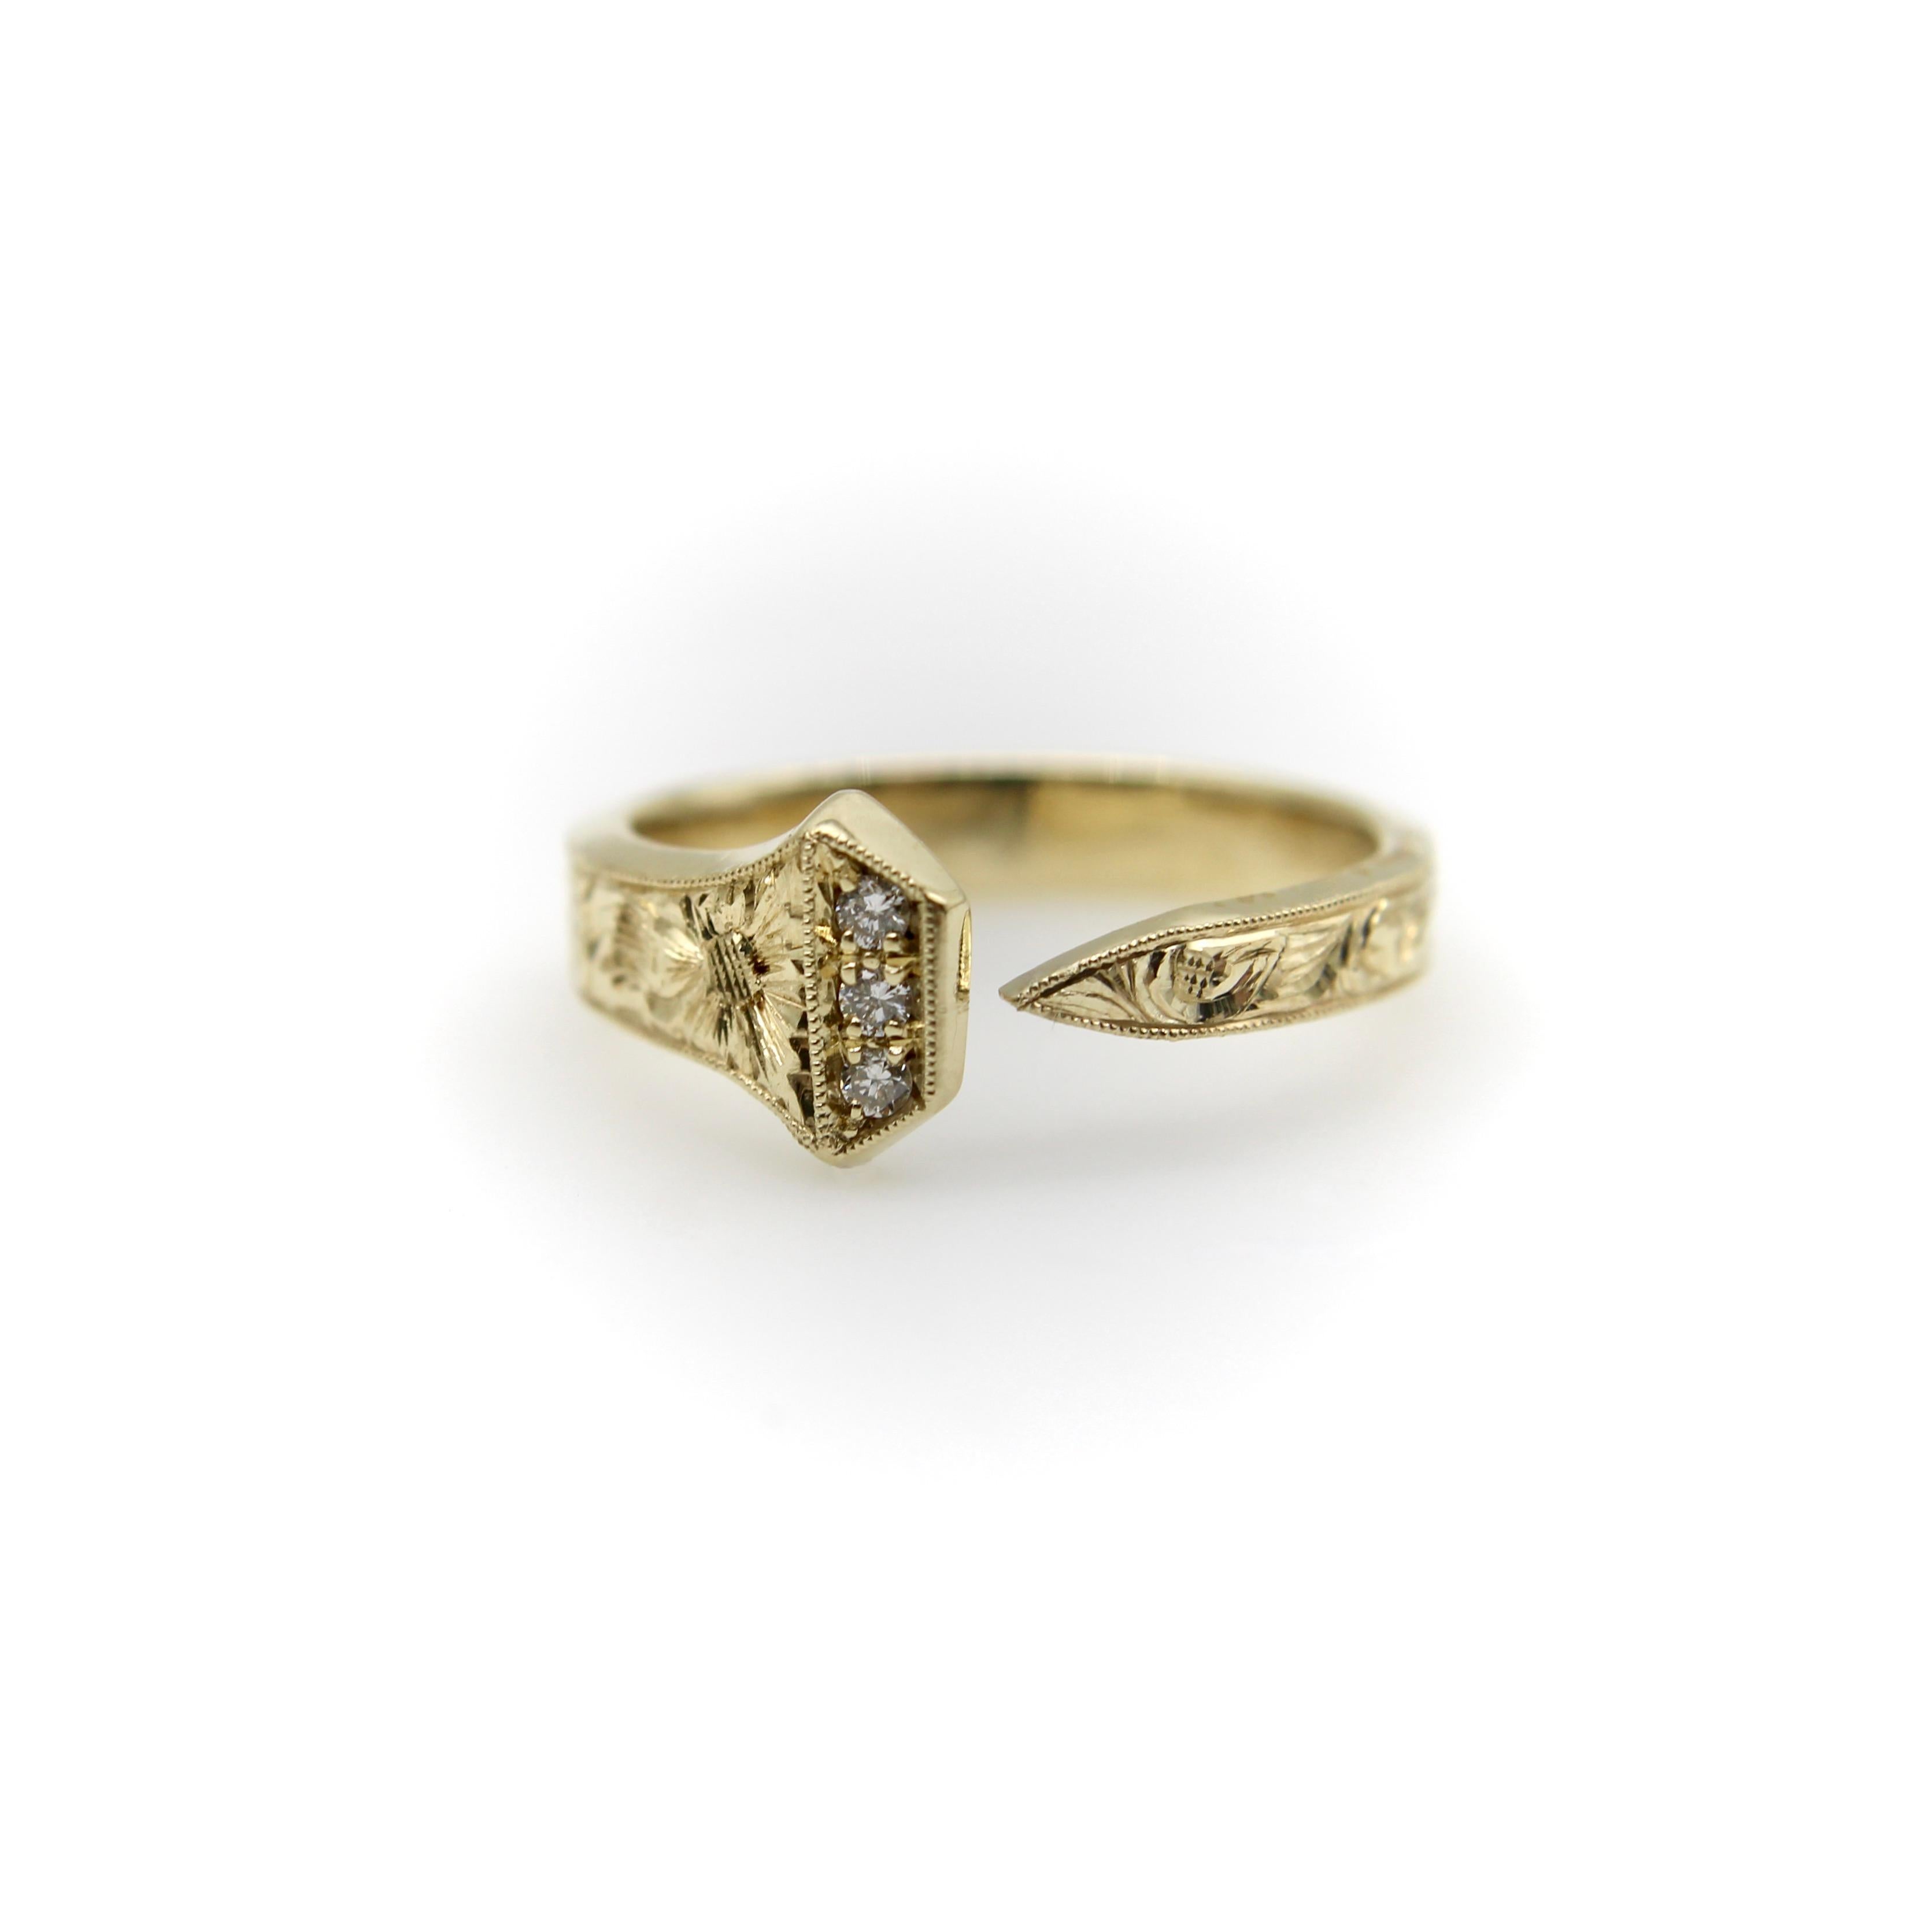 Contemporary 14K Gold Edwardian-Inspired Hand Engraved Nail Ring with Diamonds and Milgrain For Sale